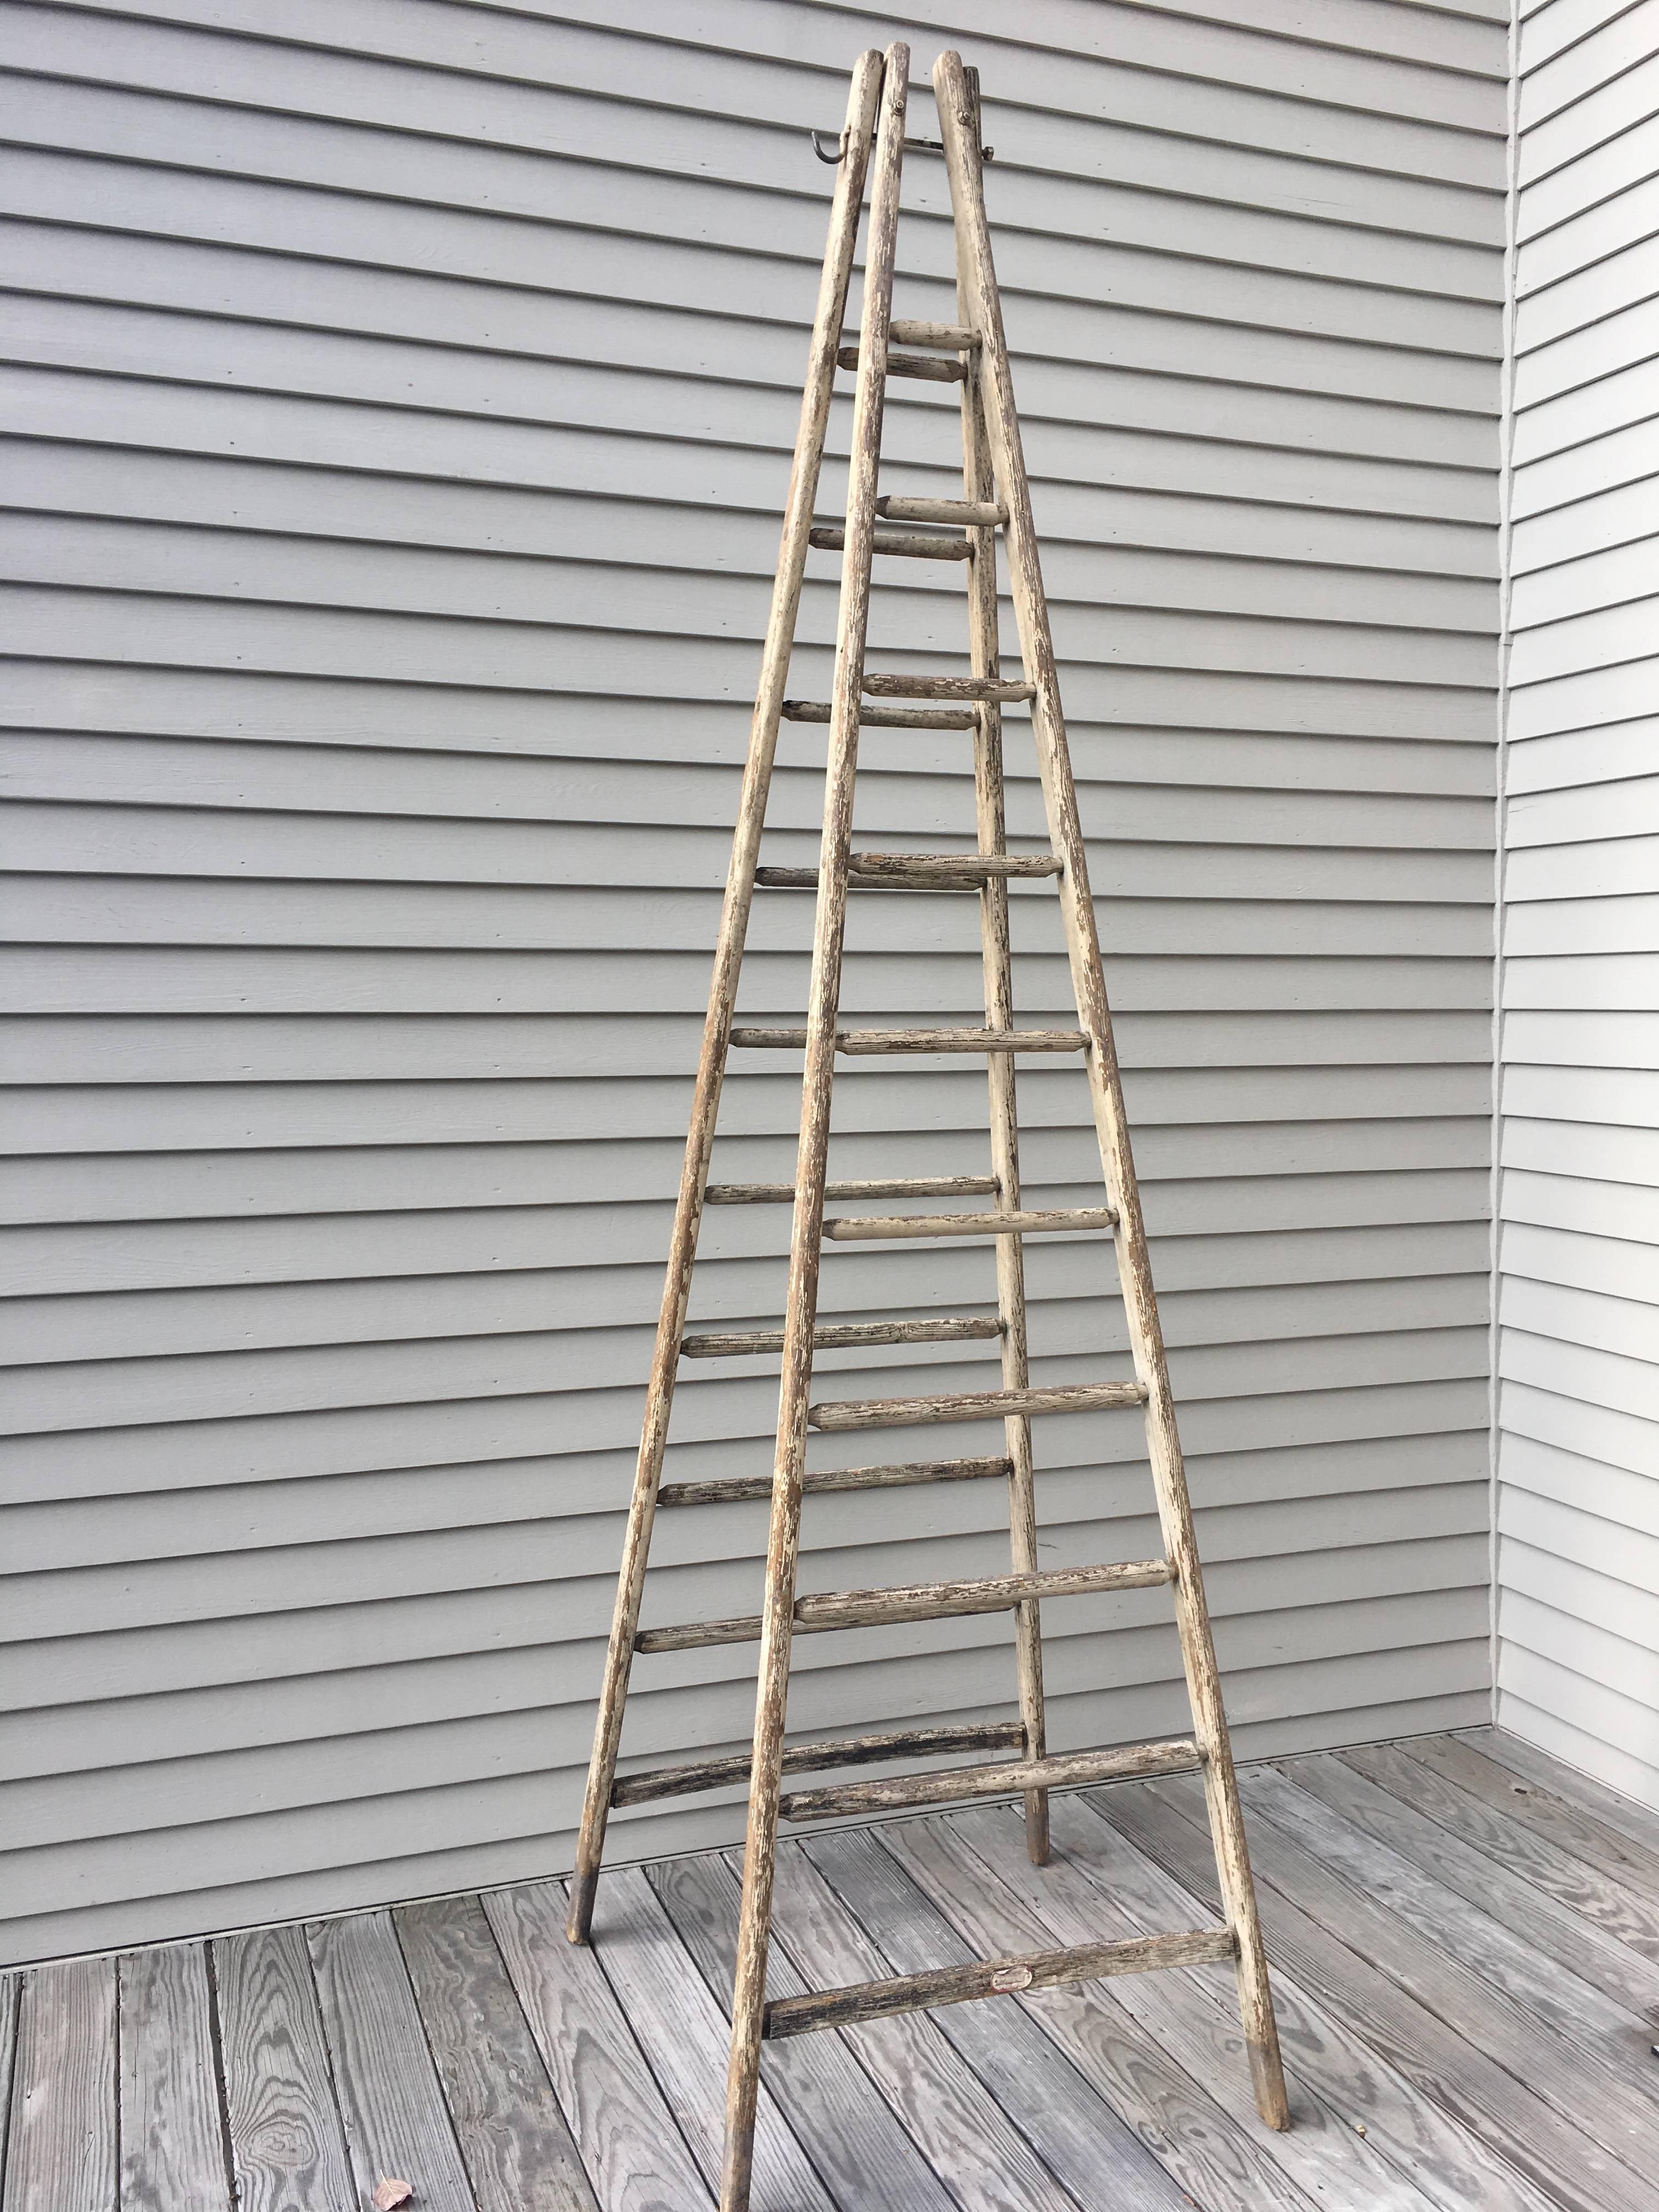 This very tall ladder is all handmade from oak and features traces of its original buttery-cream paint. It dates to the turn of the century and is in excellent condition. It would be perfect as a library ladder or as a towel rack and we can even